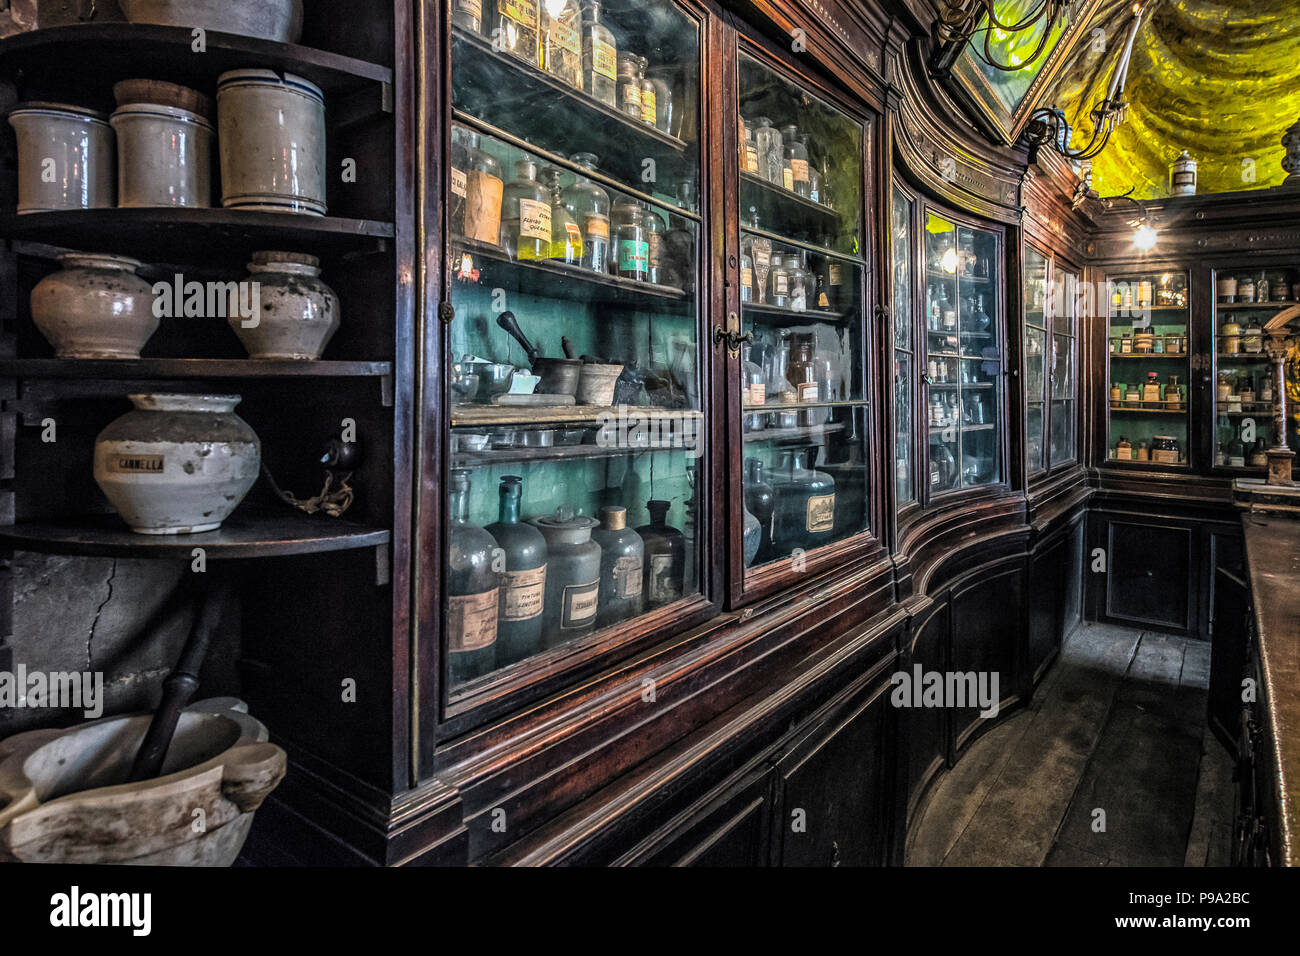 Cabinets and furnitures behind the desk of the pharmacist of the old Pharmacy and Apothecary 'Farmacia di S. Maria della Scala' in Piazza della Scala in Trastevere quarter, Rome, Italy Stock Photo